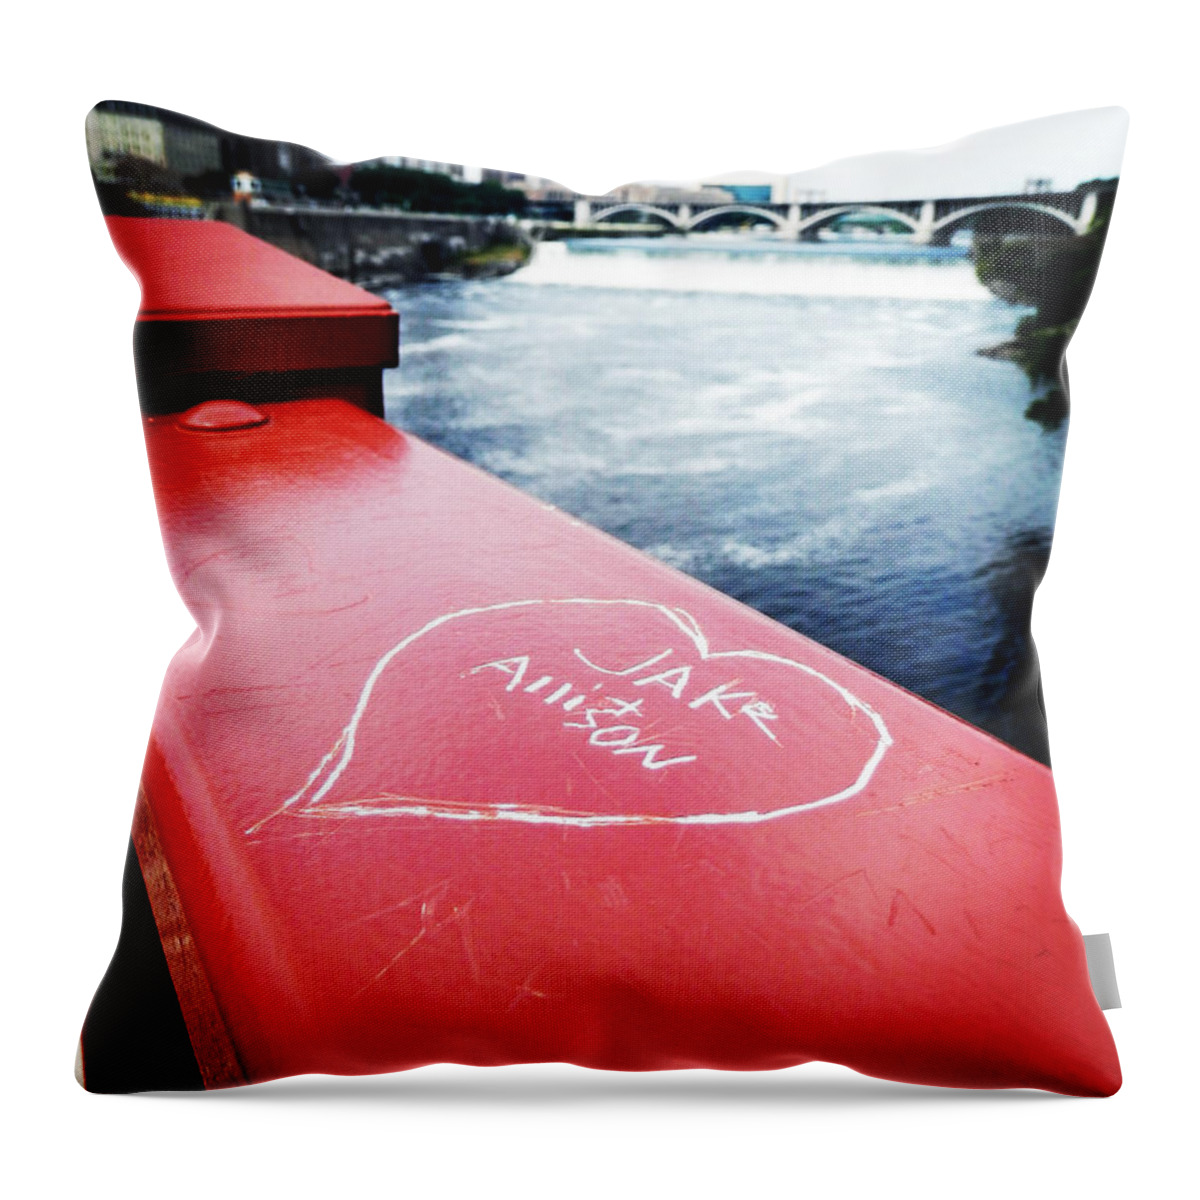 Mississippi River Throw Pillow featuring the photograph Love By Mississippi River by Zinvolle Art